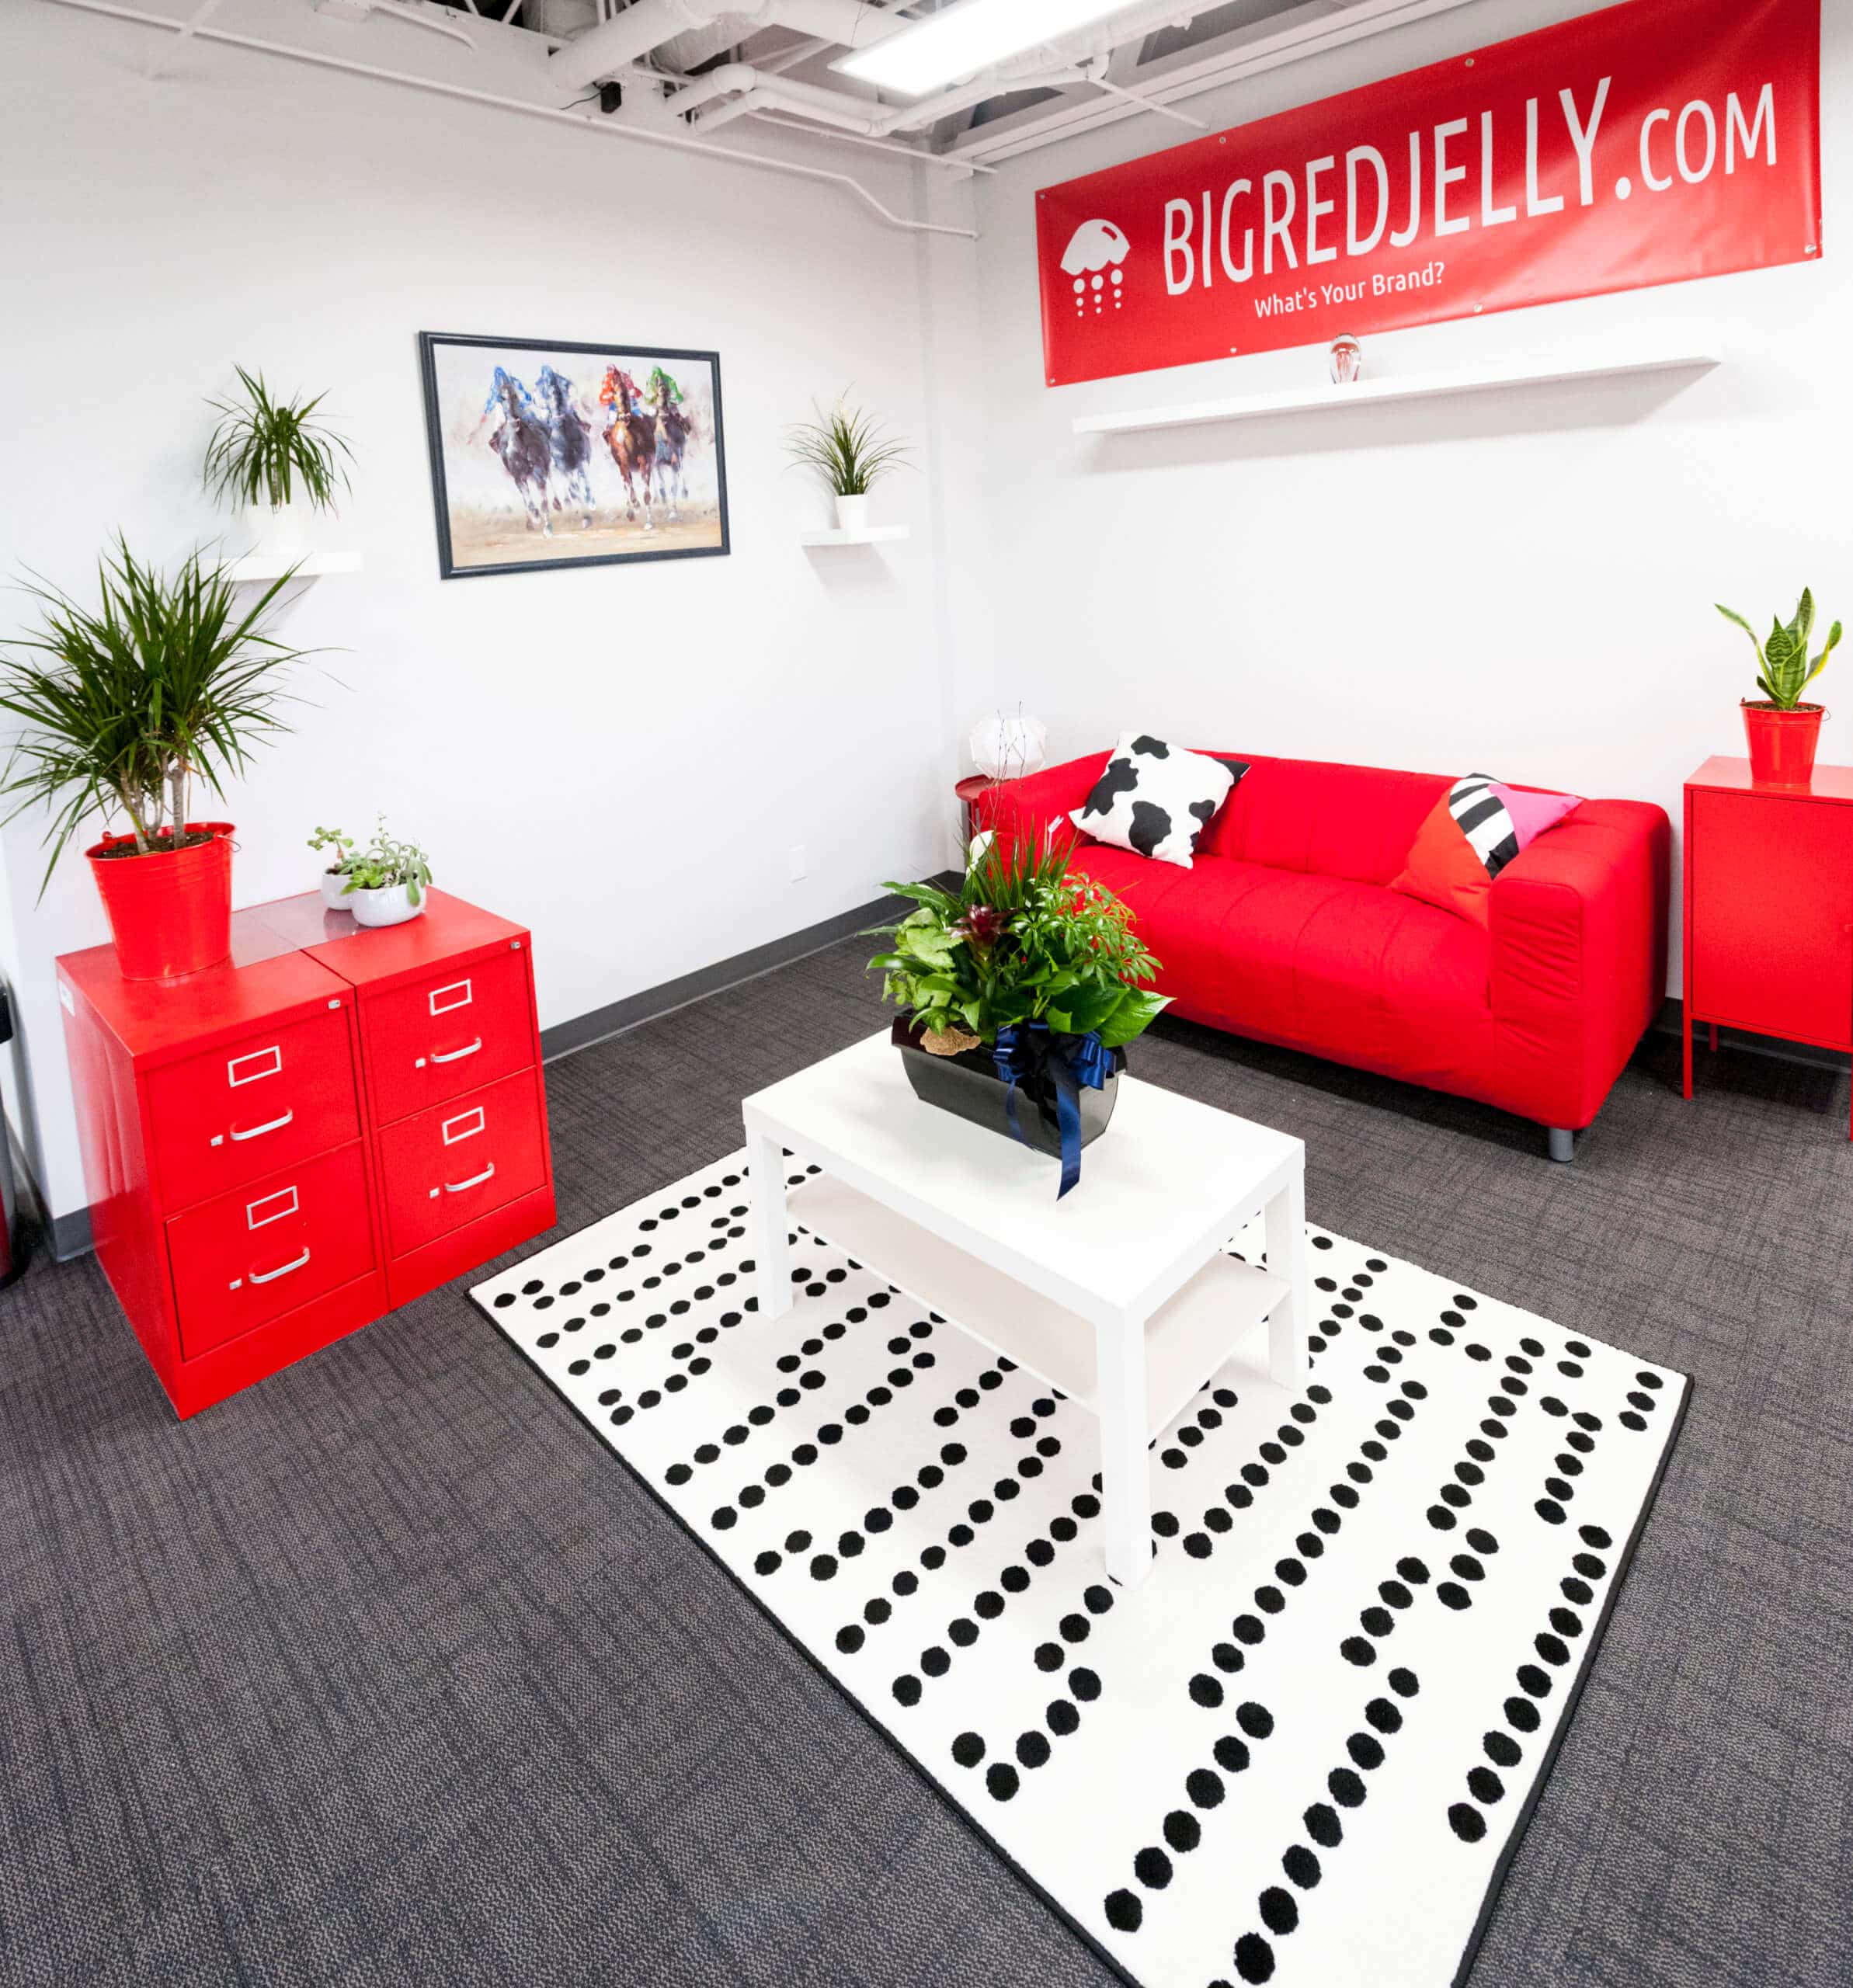 Big Red Jelly office.